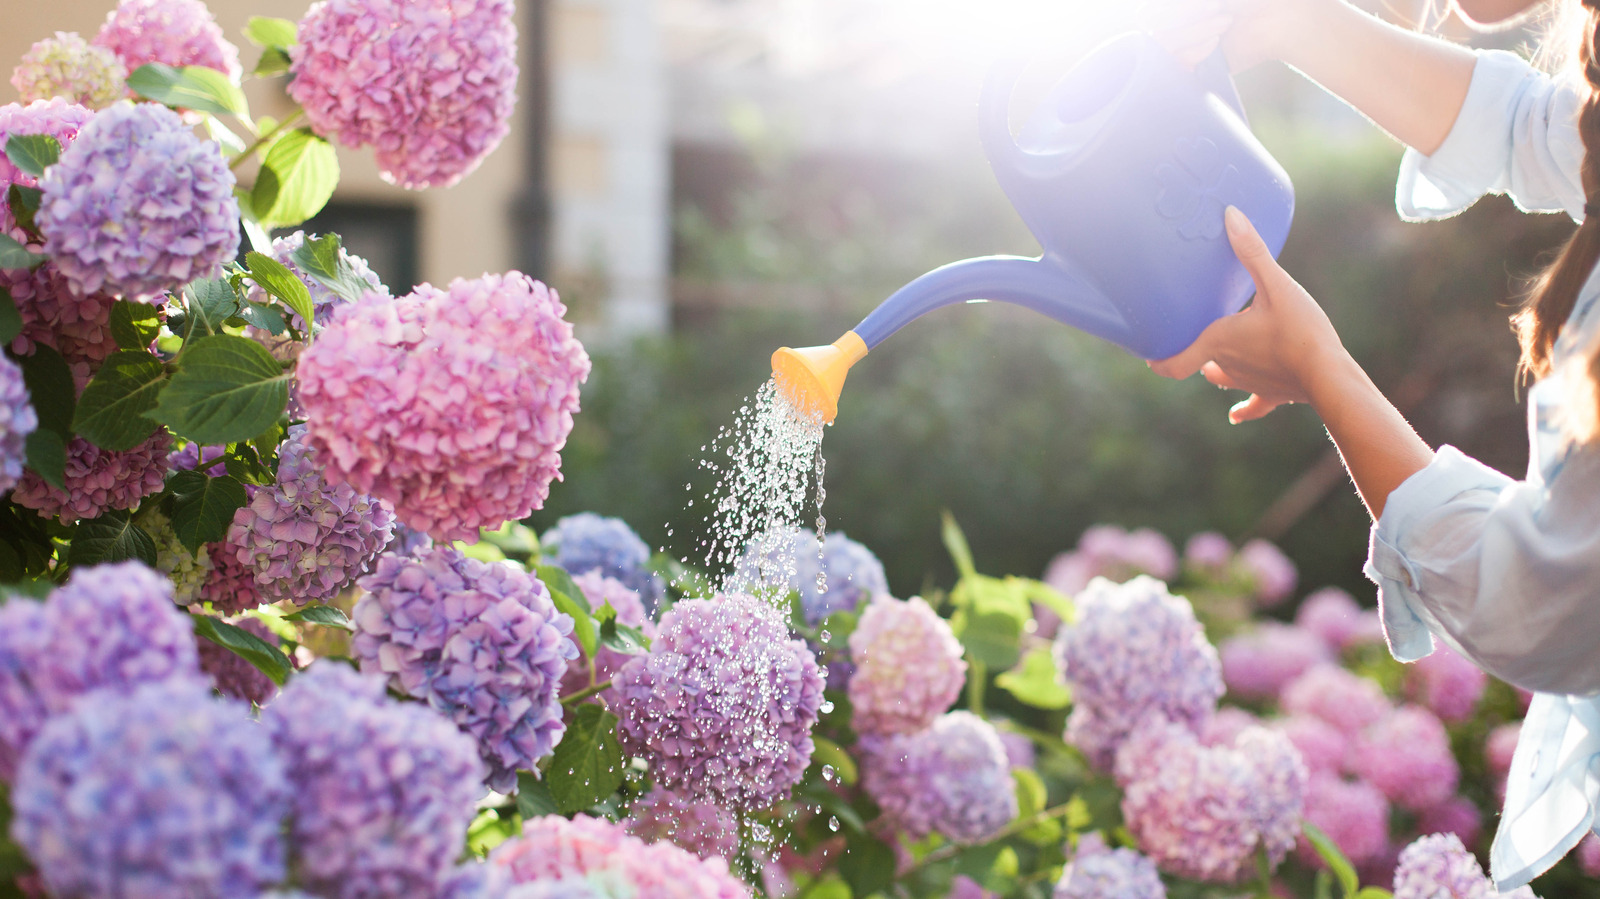 Is Pickle Juice The Secret To Thriving Hydrangeas? - House Digest